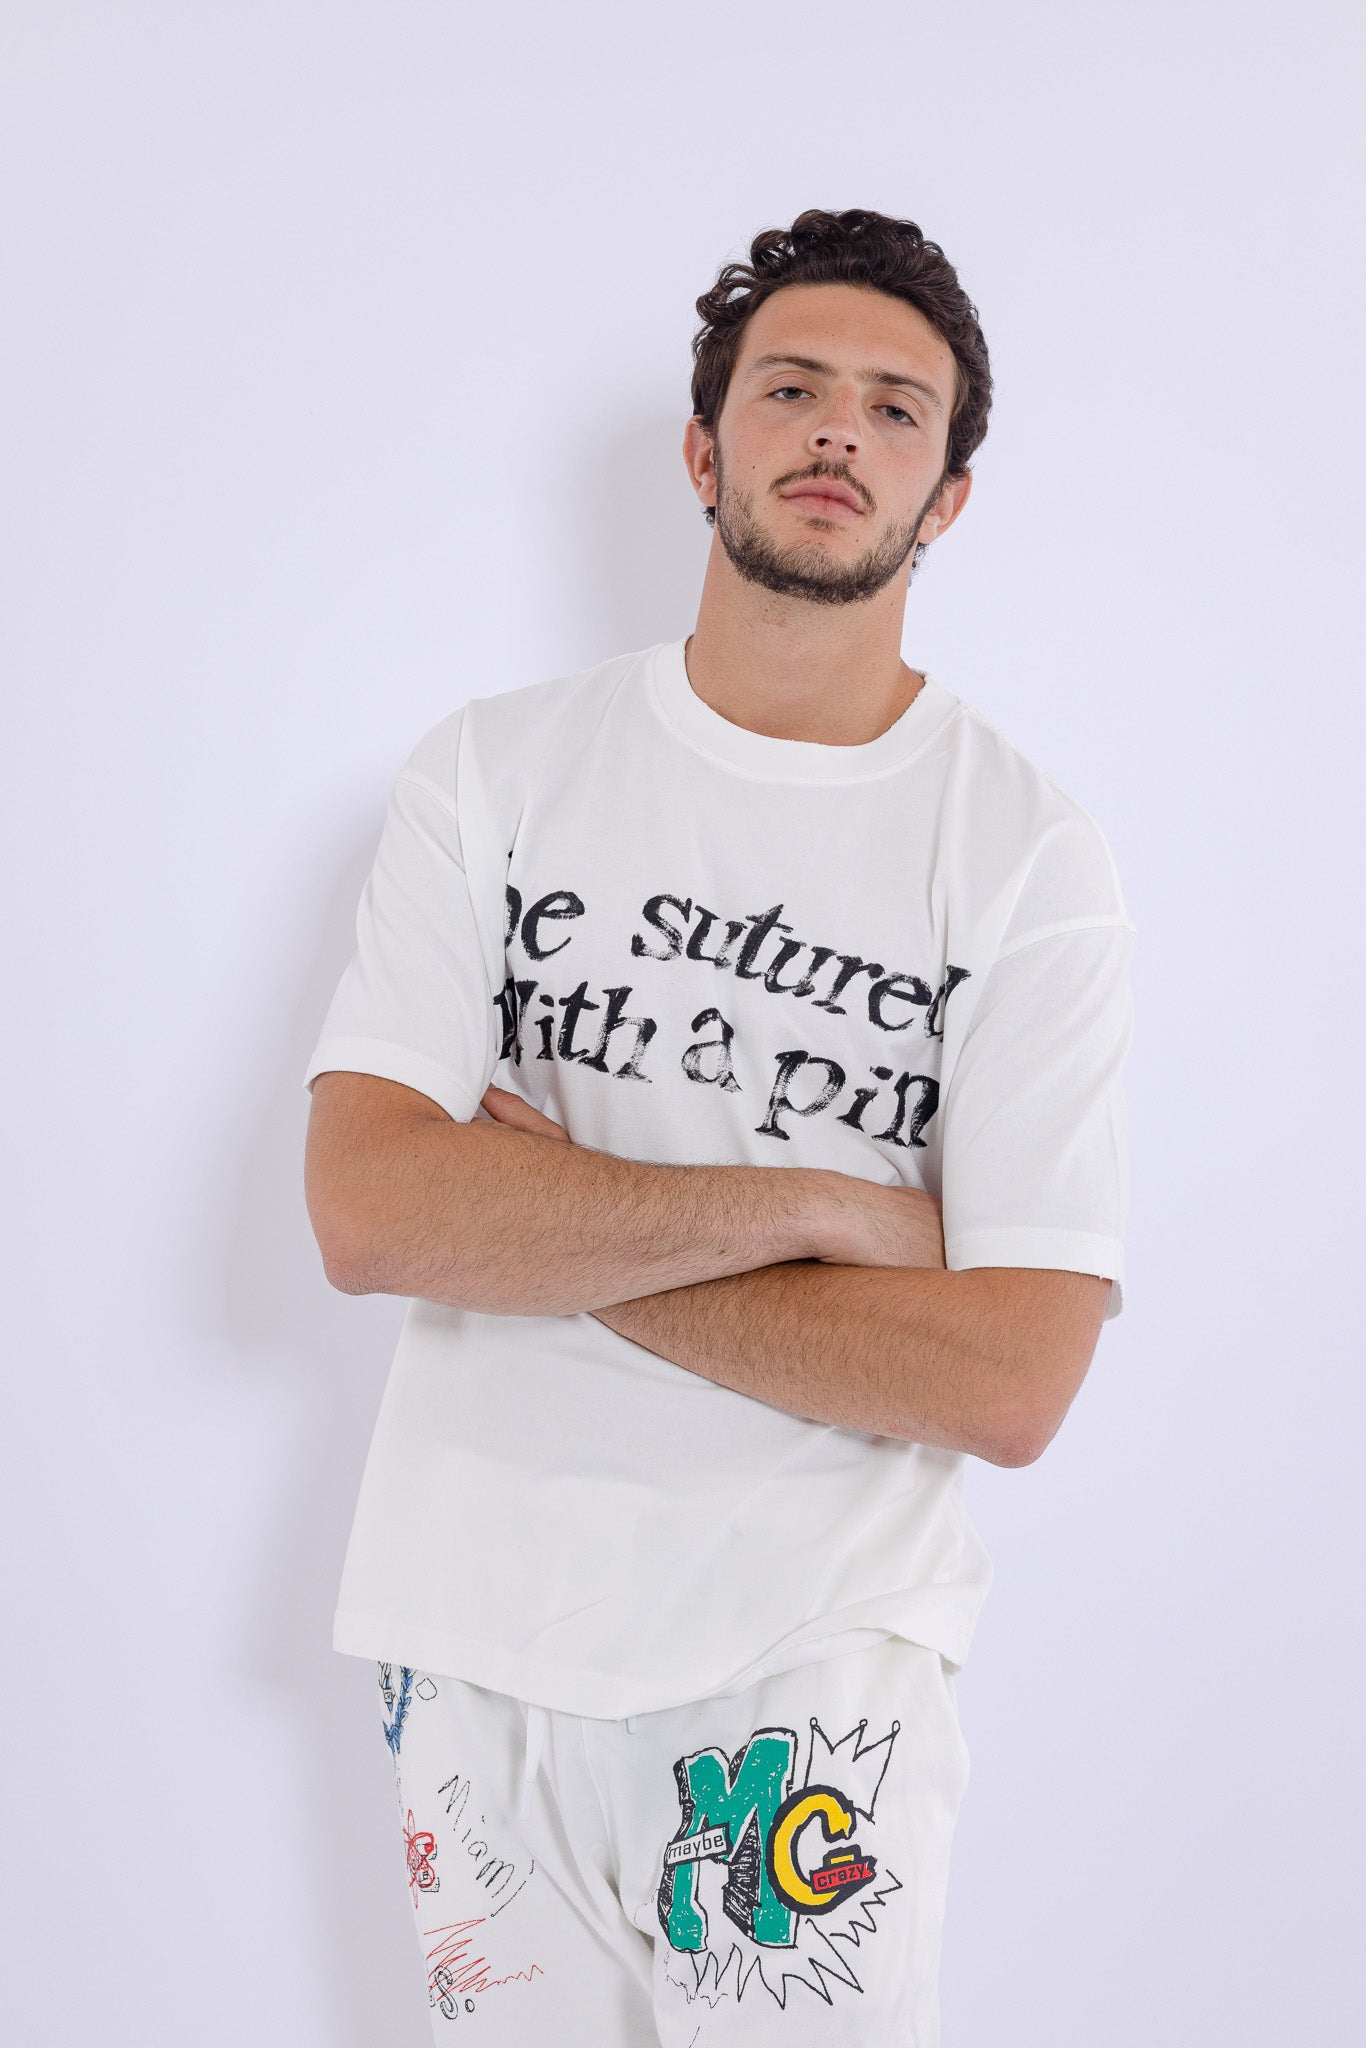 Be Sutured With a Pin T-Shirt